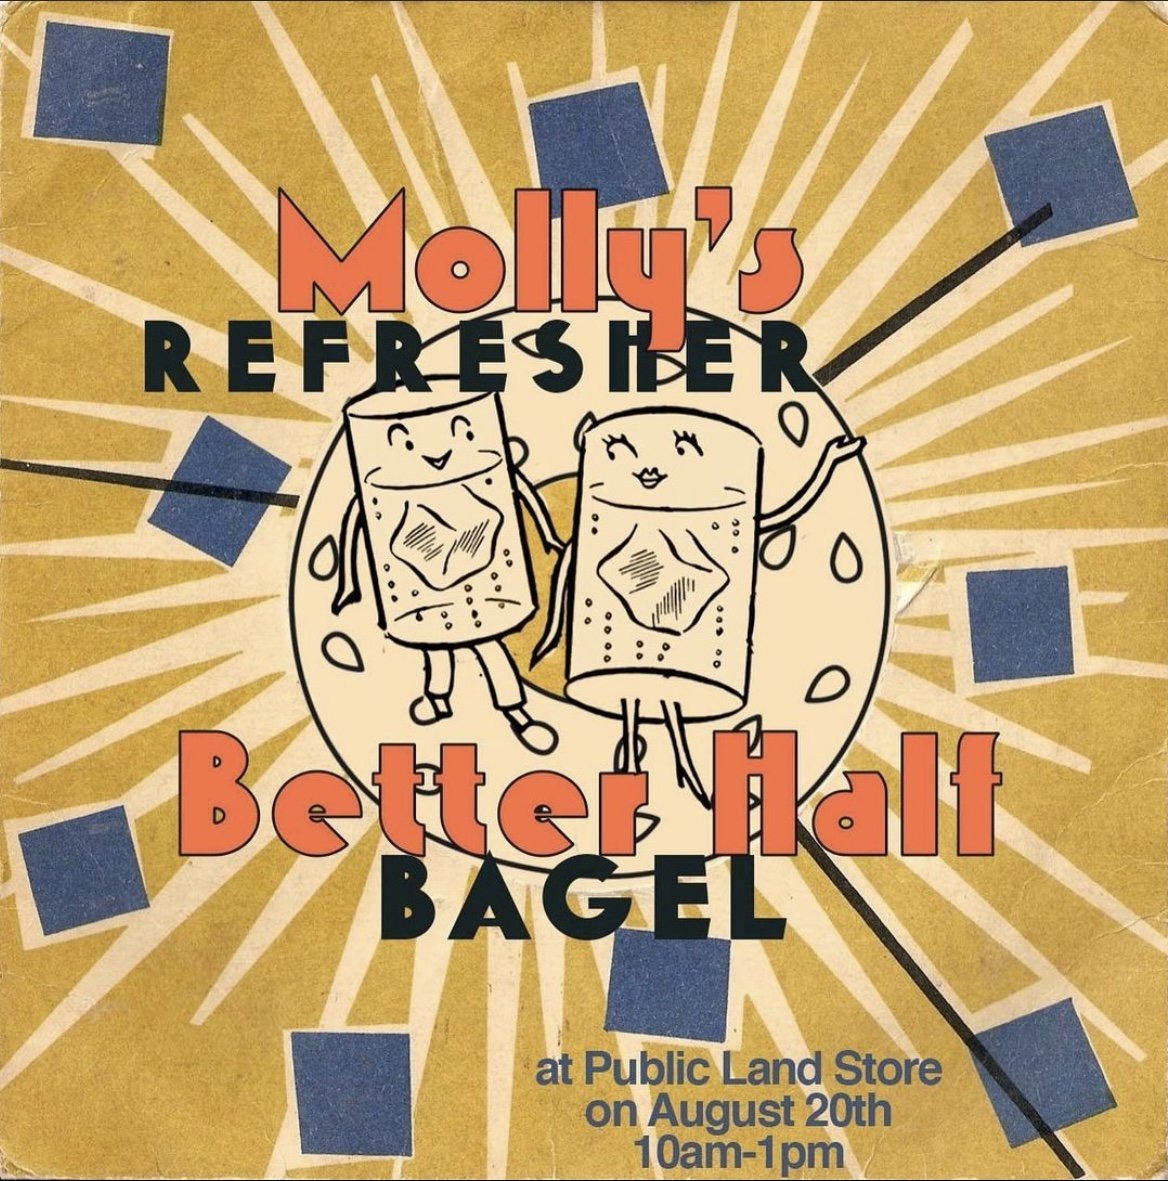 Molly's Refreshers + Better Half Bagel Pop-Up